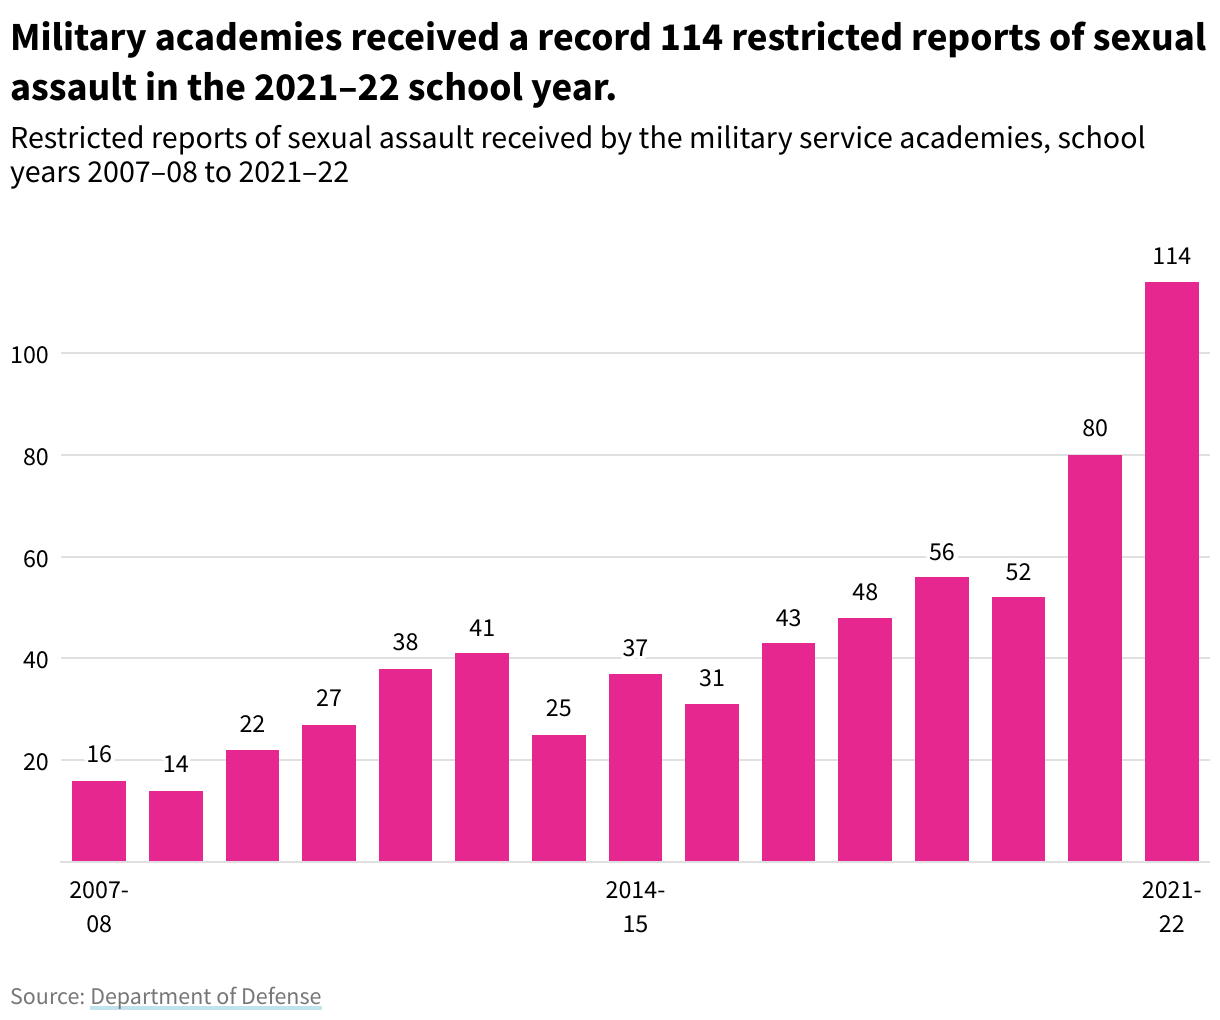 Bar chart showing restricted reports of sexual assault received by the military service academies, school years 2007–08 to 2021–22. Military academies received a record 114 restricted reports of sexual assault in the 2021–22 school year.